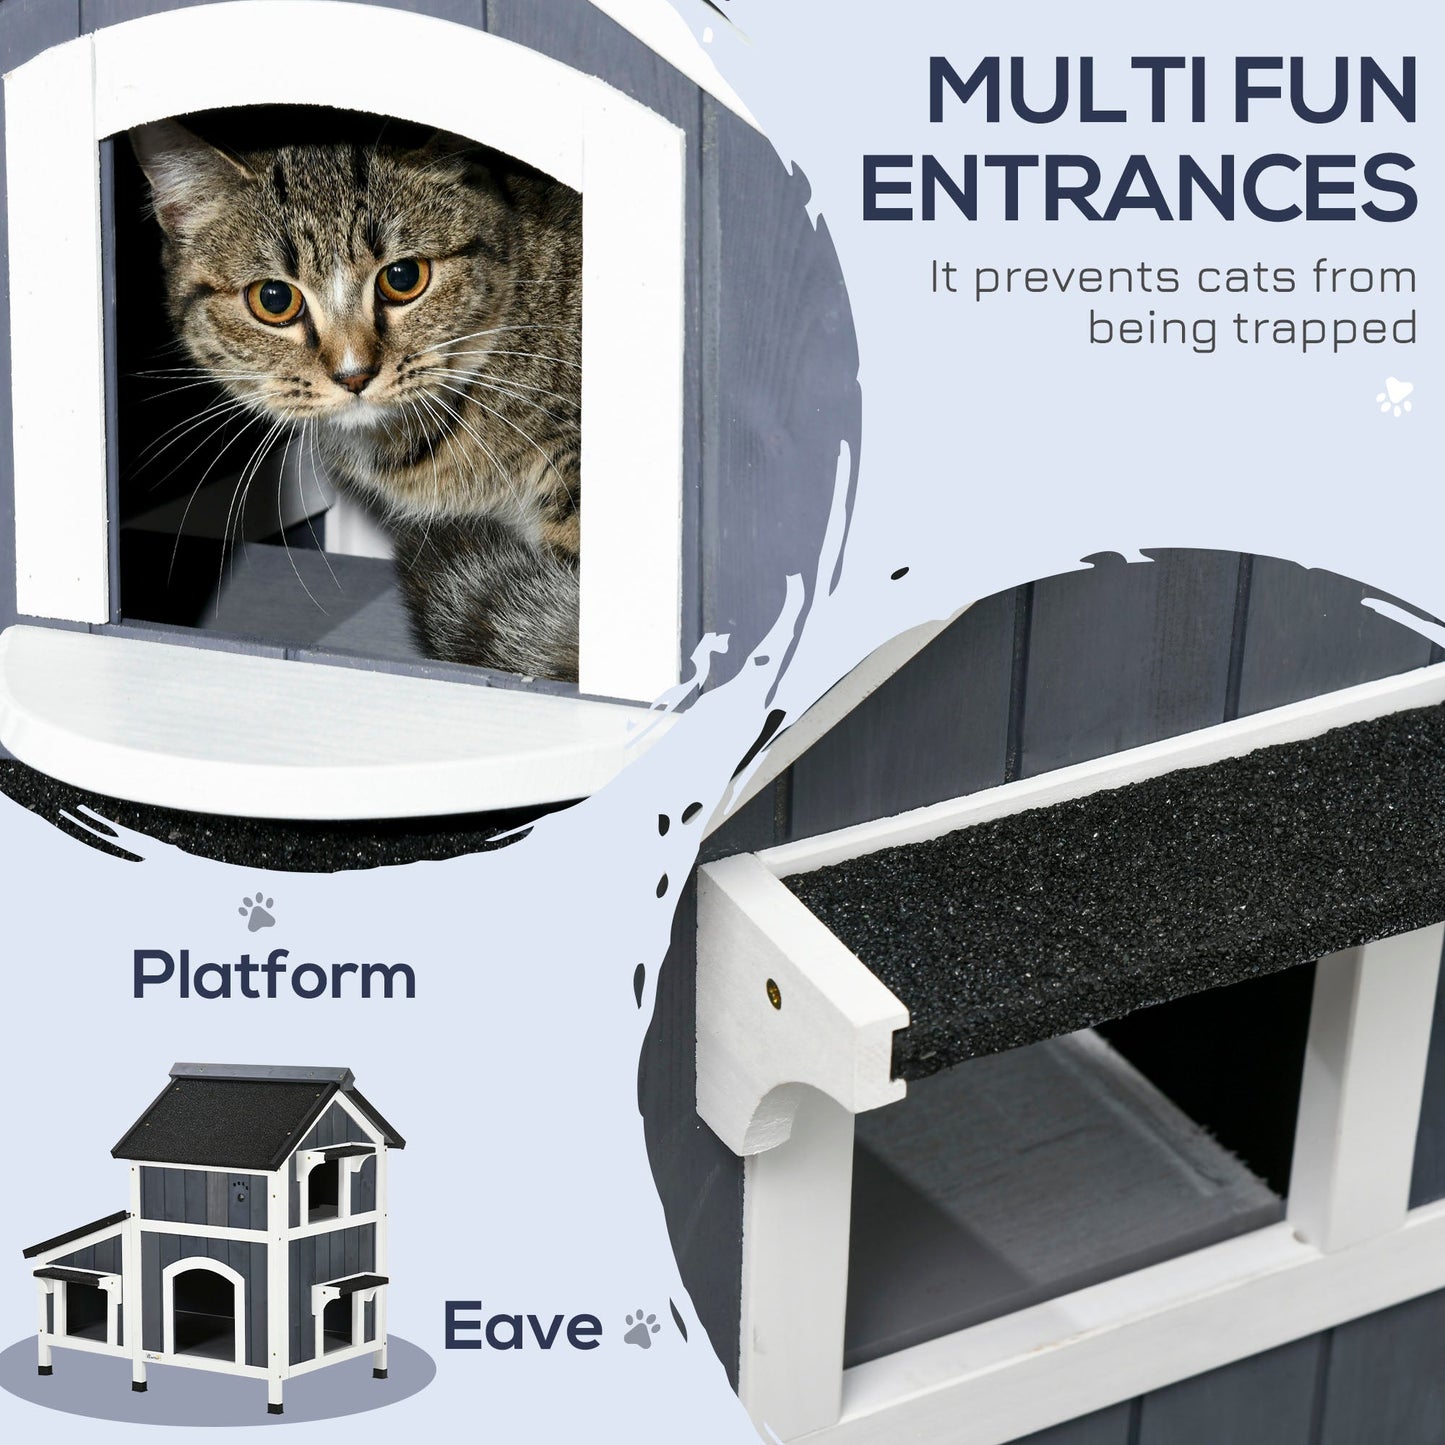 Outdoor and Garden-Outdoor Cat House with Flower Pot, 2-Story Feral Cat House with Weather Resistant Roof, Wooden Cat Shelter with Window, Multiple Entrances - Outdoor Style Company